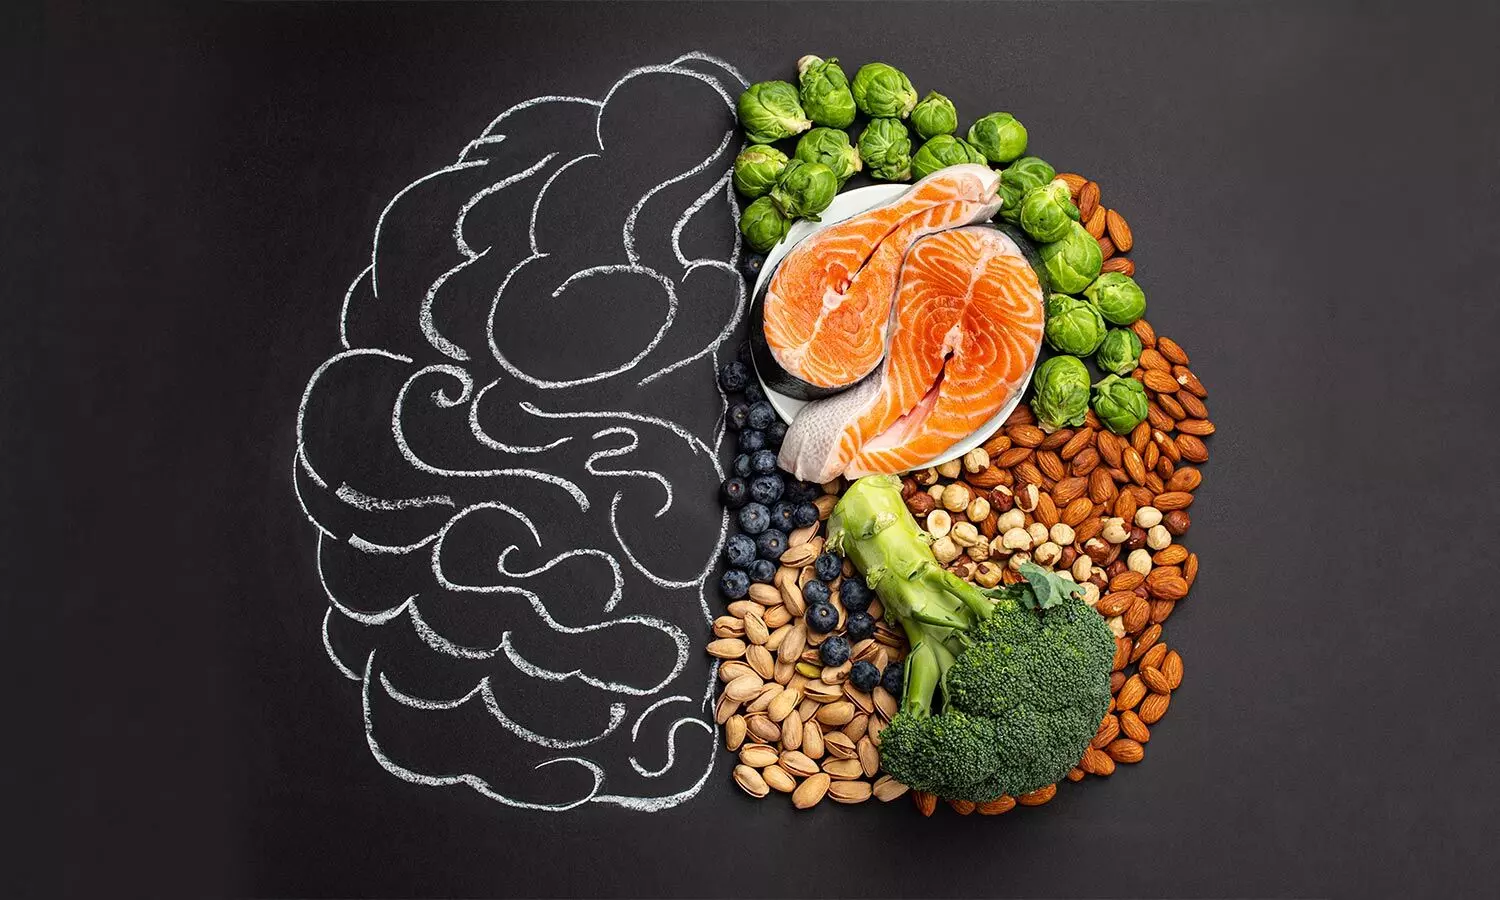 Supercharge Your Memory with These Delicious Brain-Food Wonders